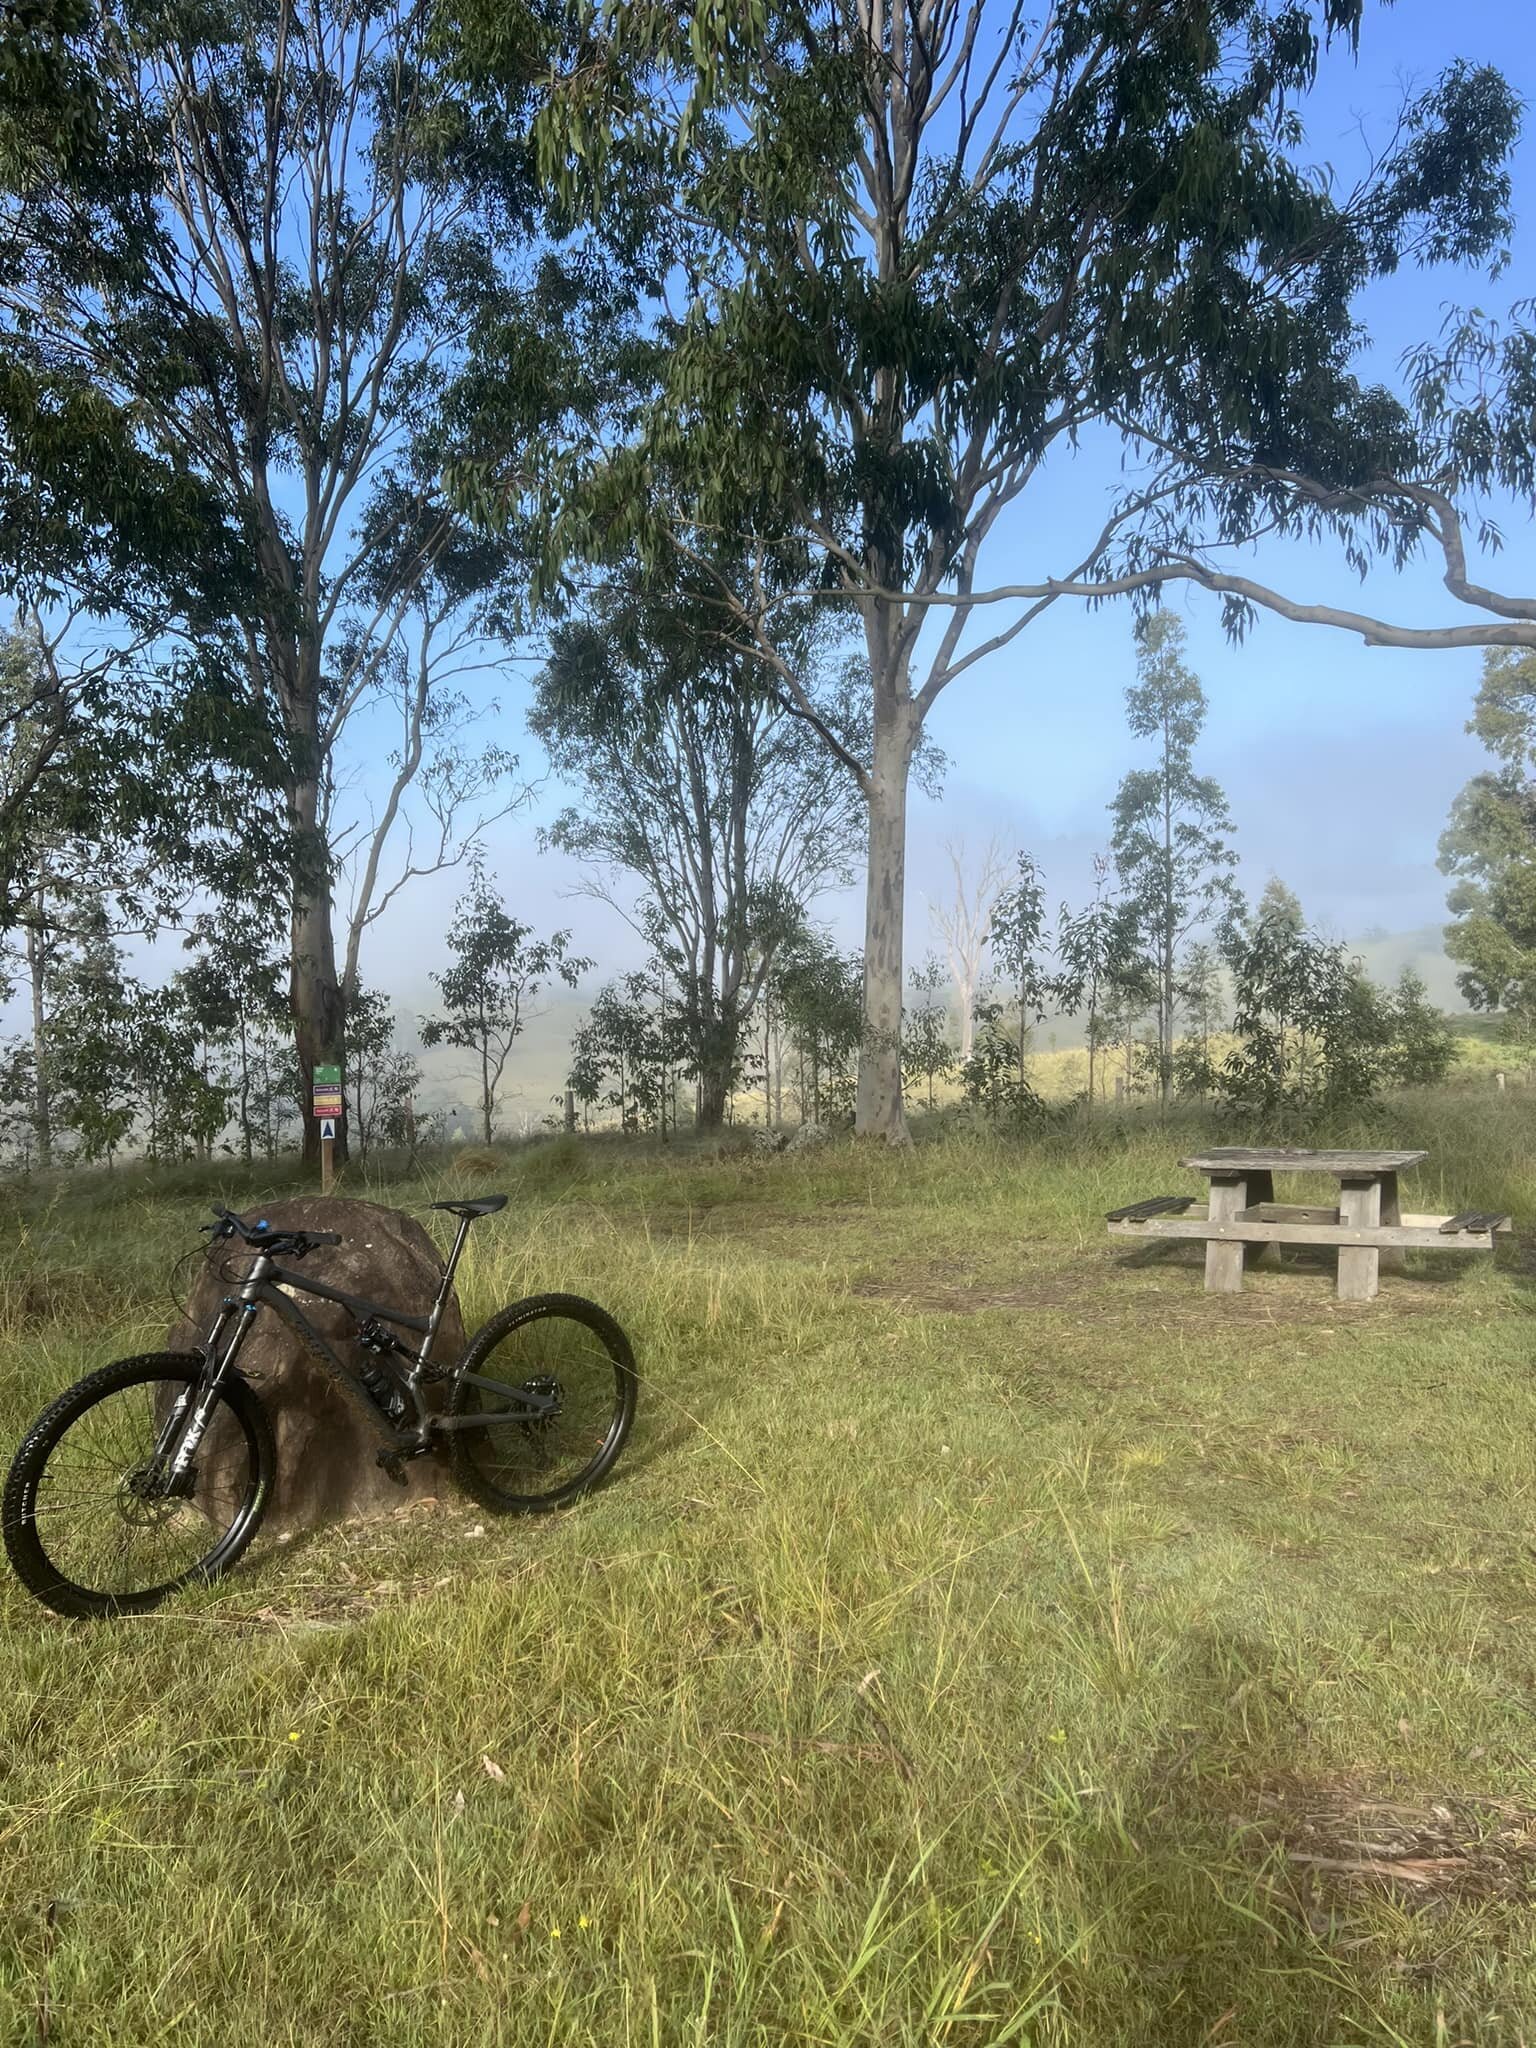 Ride Dunfog this morning, but it&rsquo;s lifting and tracks are rolling sweet.
#ridedungog #grantedridesmountainbike